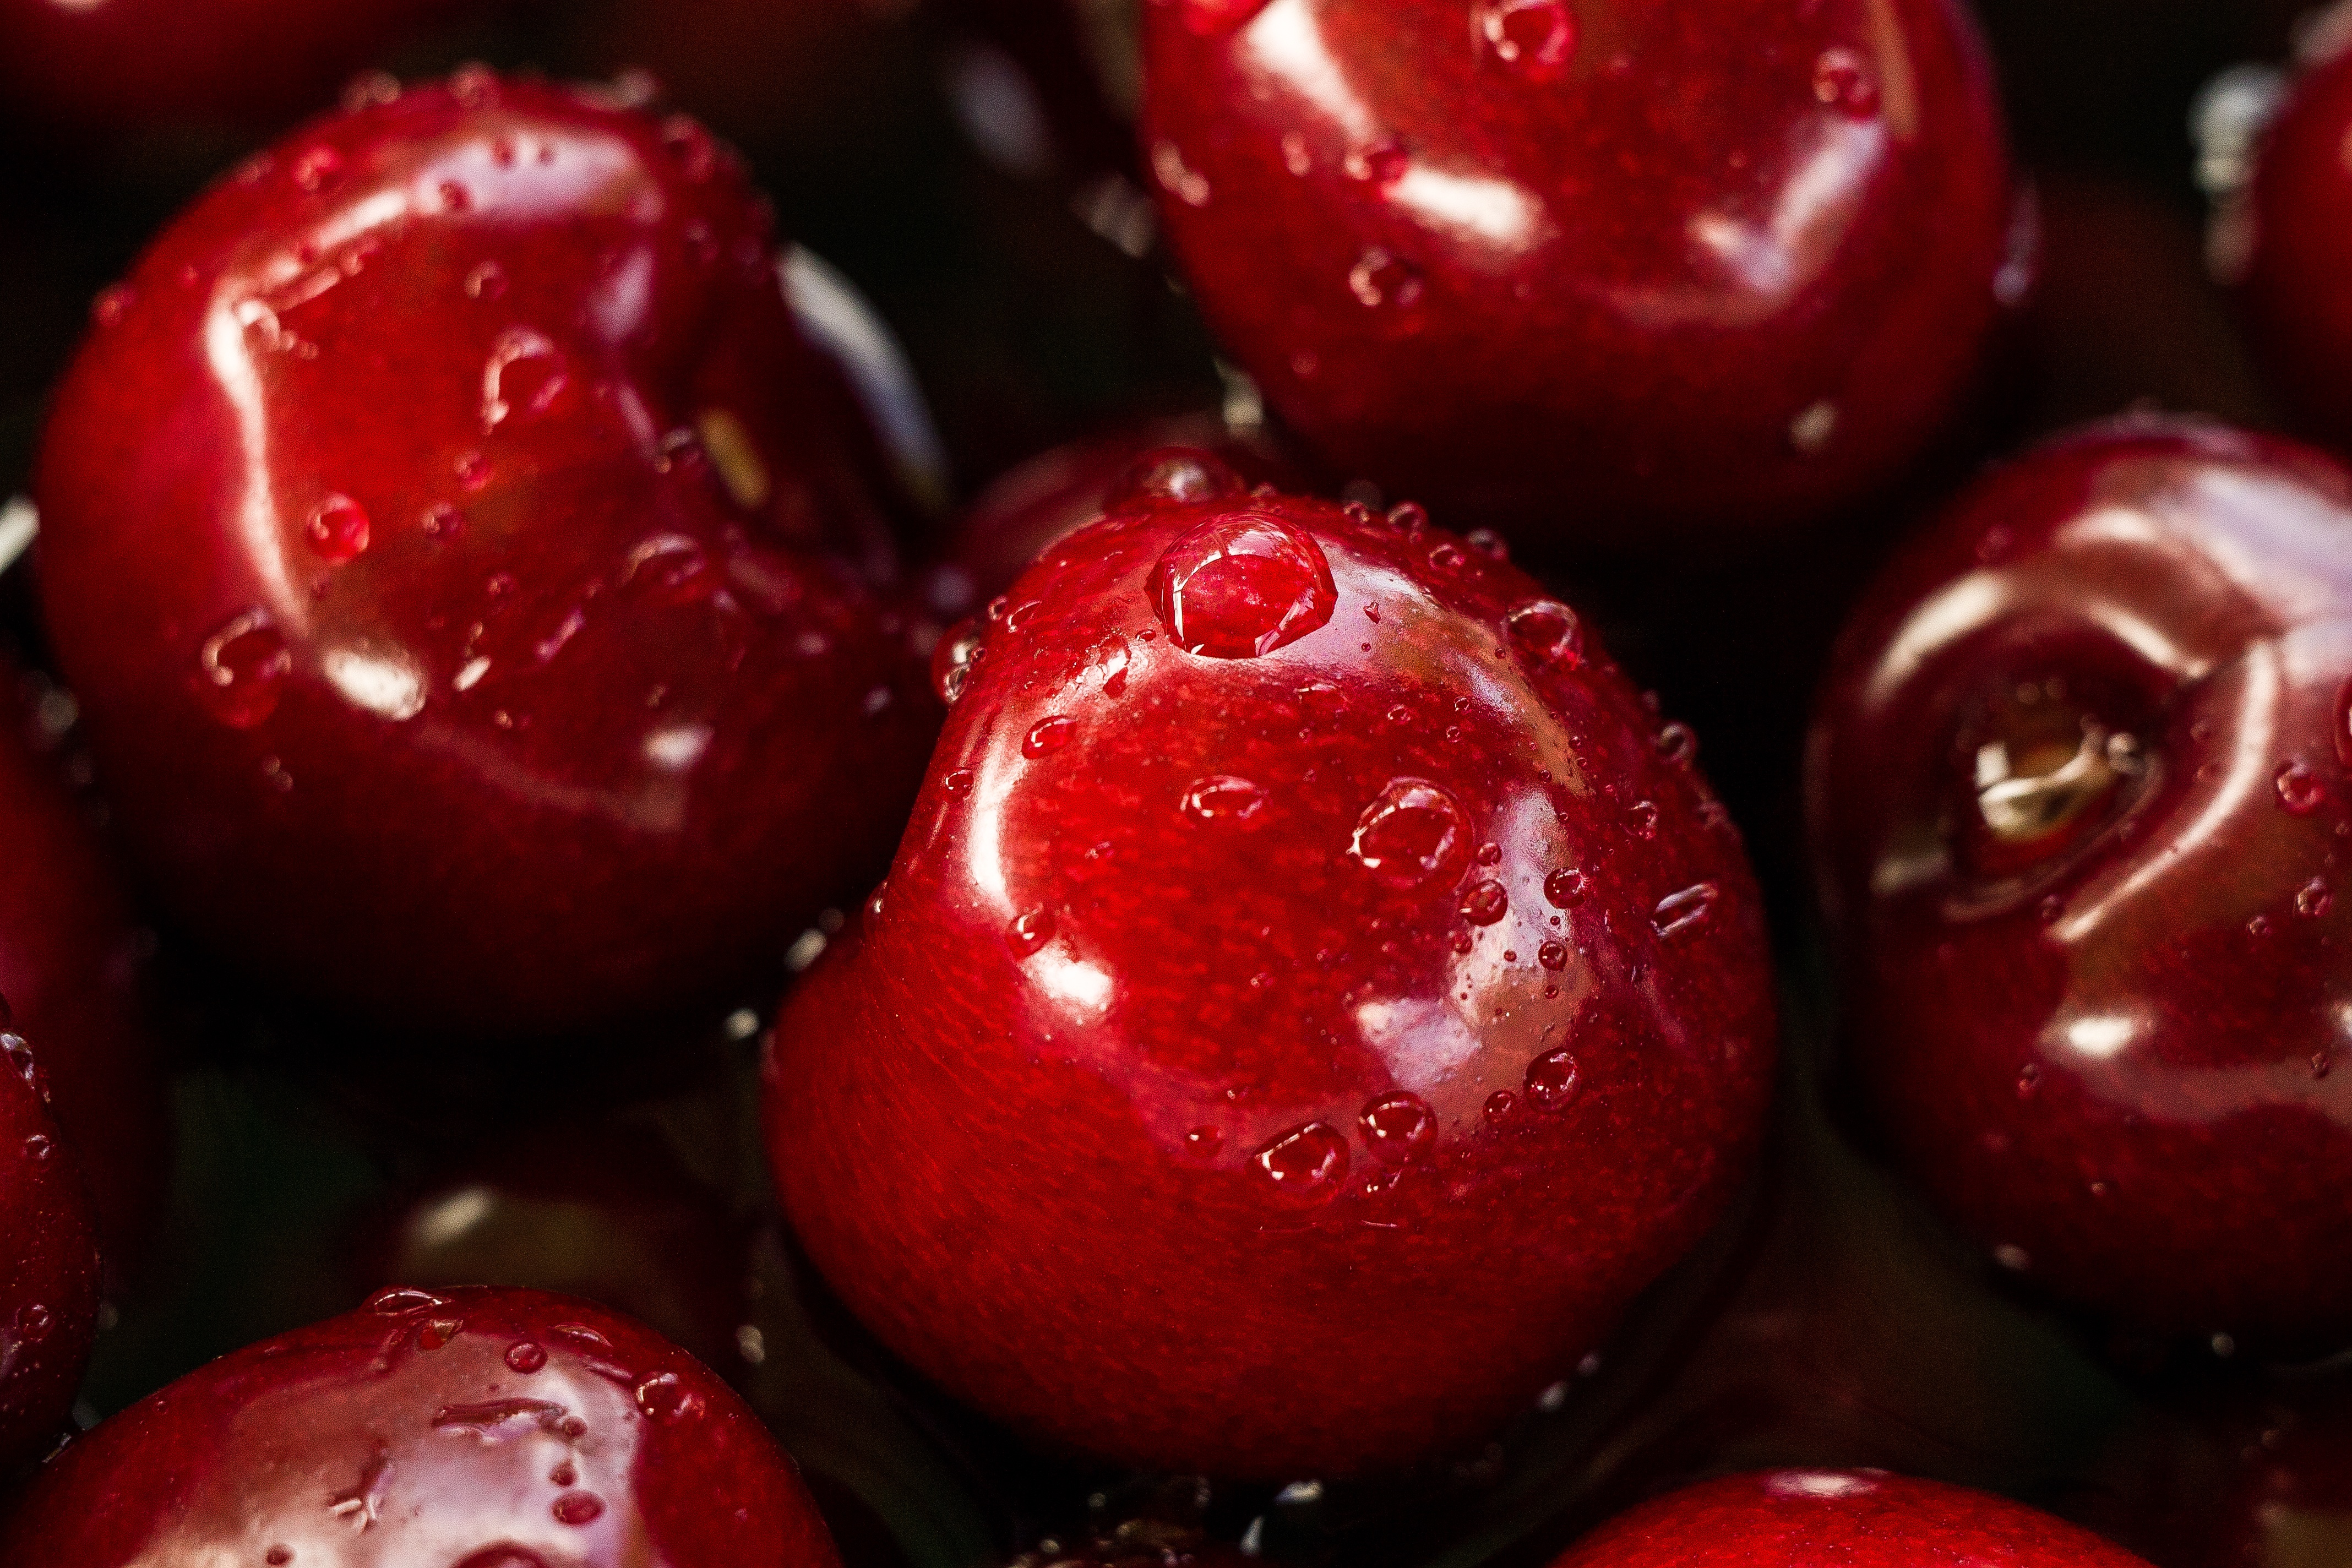 Washed red cherries